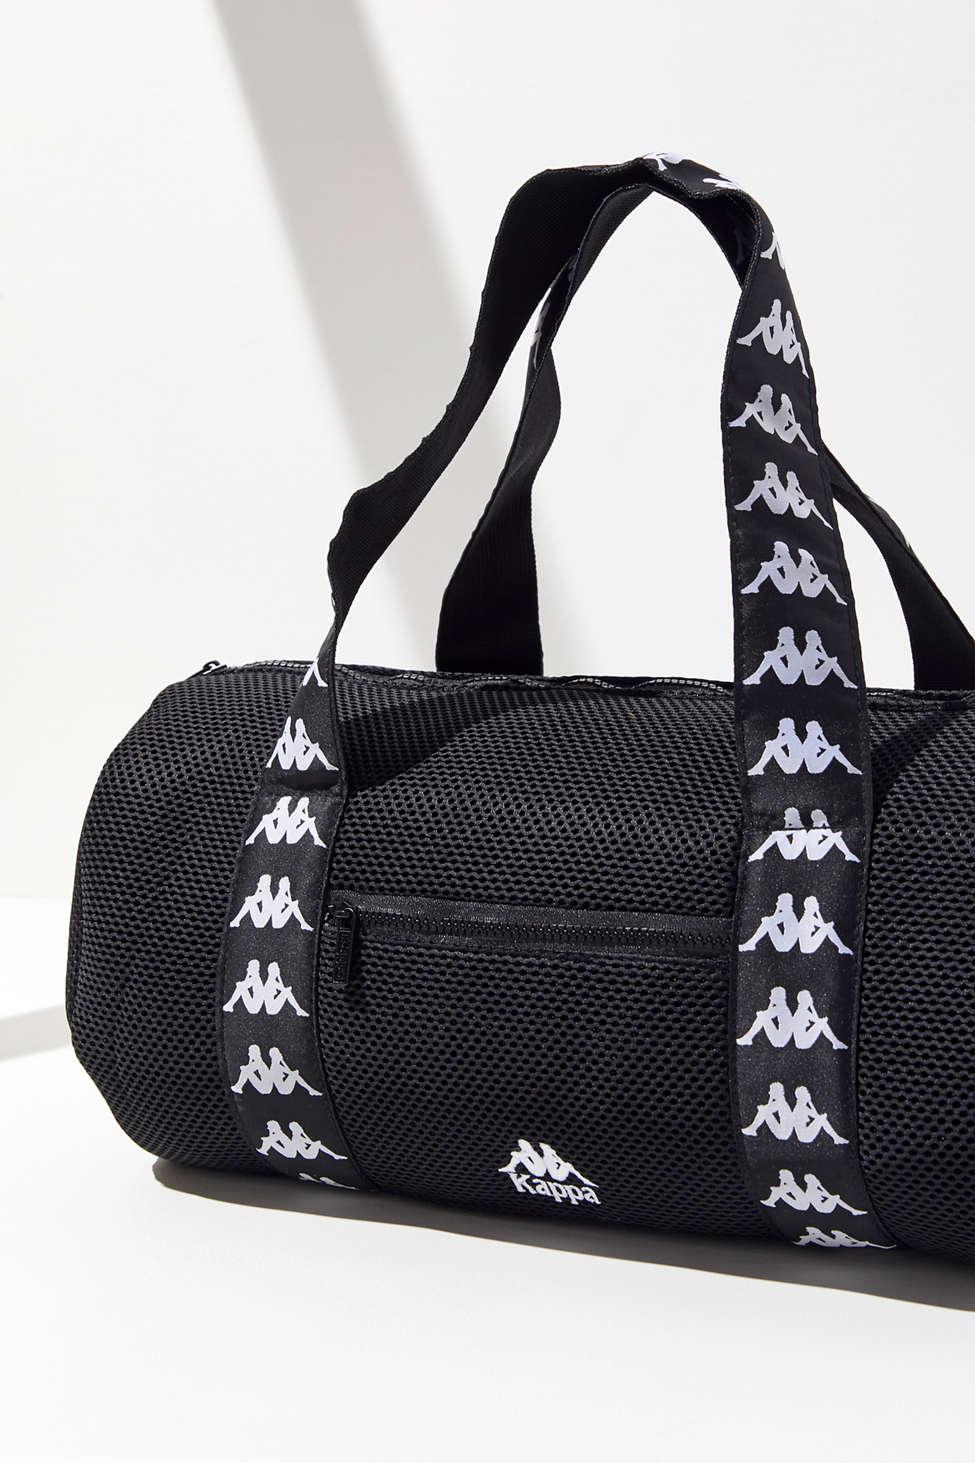 Kappa Synthetic Authentic Angy Duffle Bag in Black - Lyst